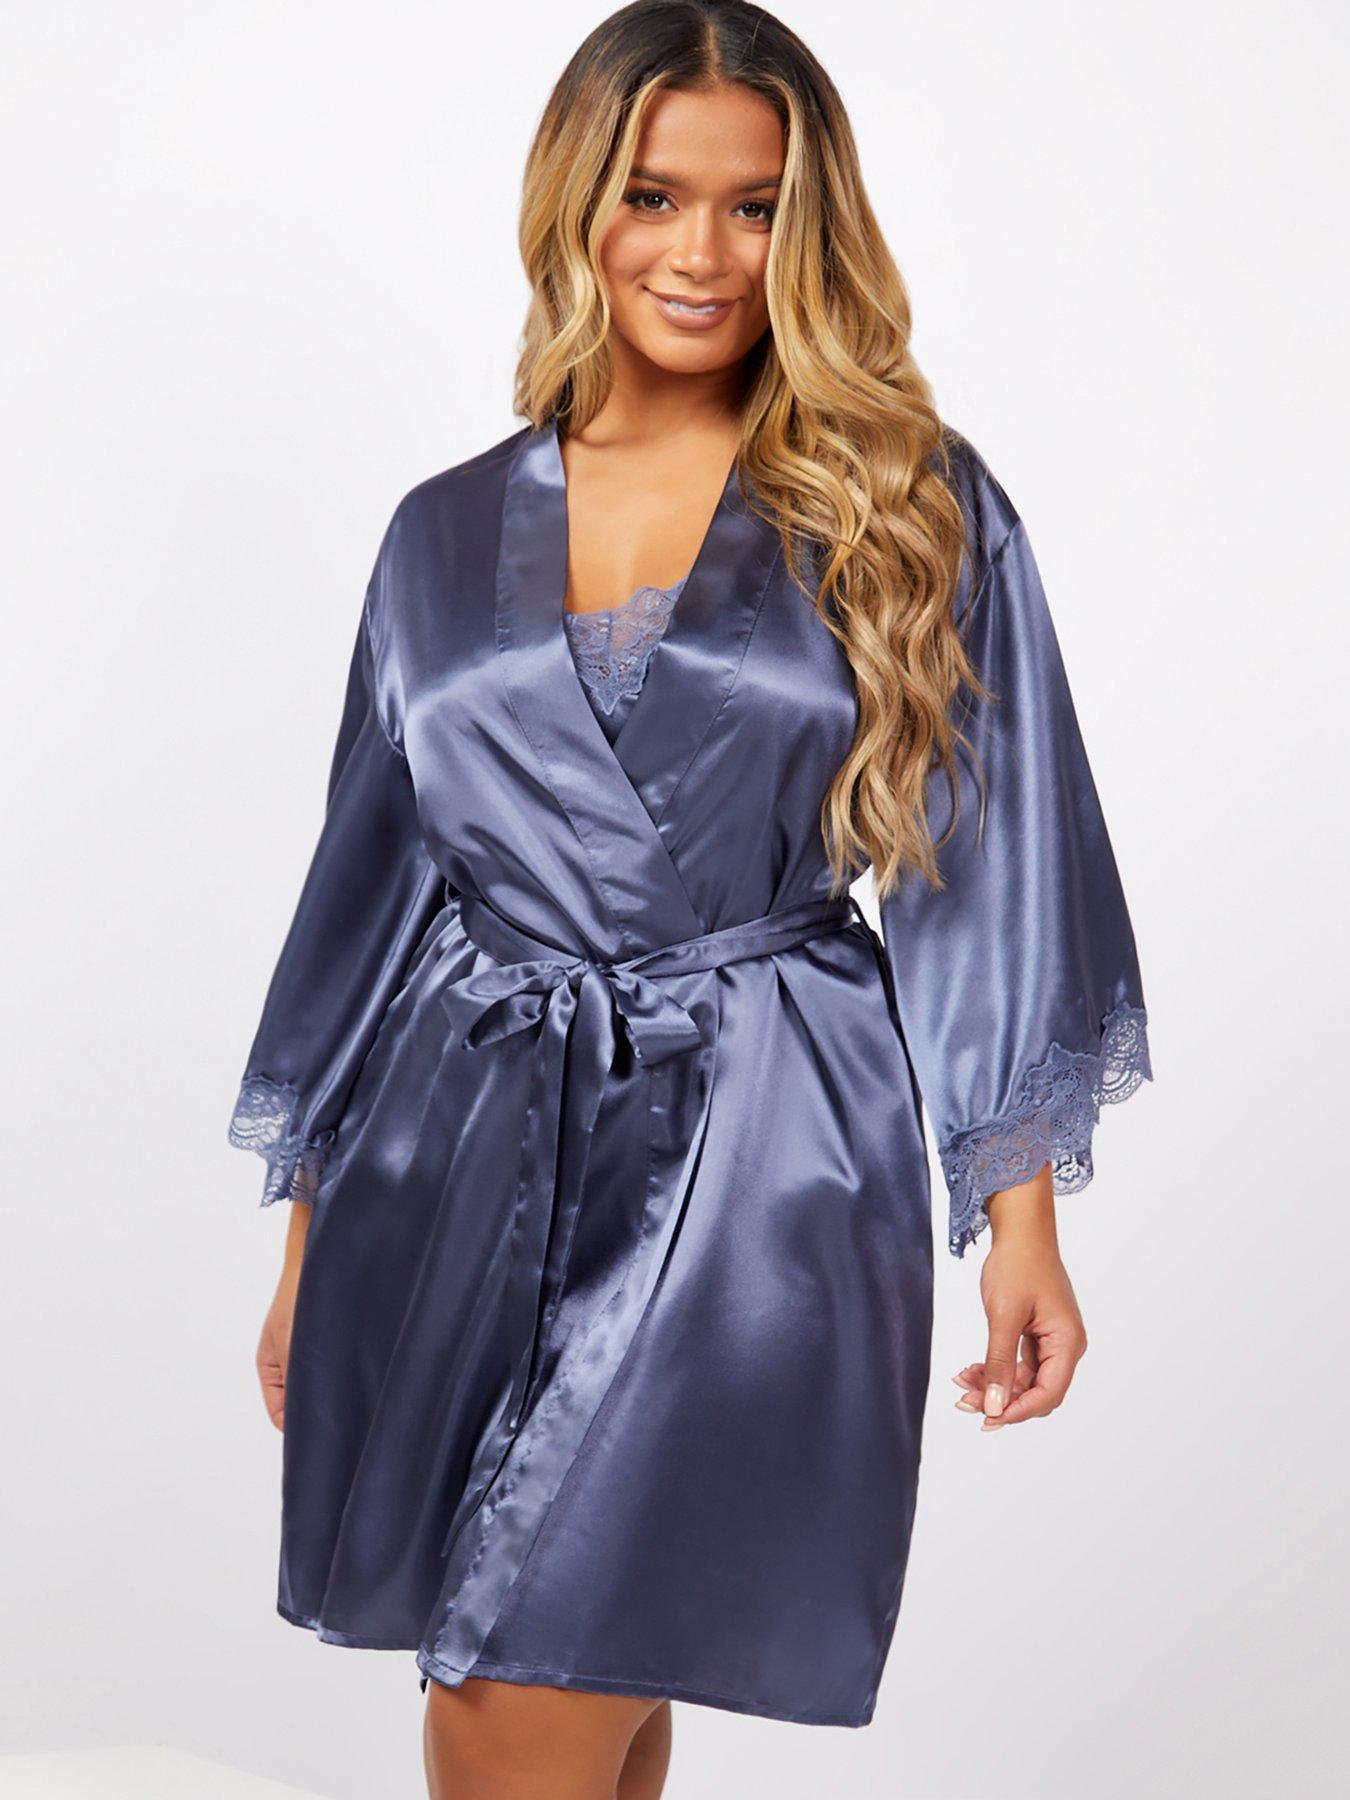 Details about   ladies NIGHTWEAR DRESSING GOWN WITH HOOD SIZE 12-14 BOUX AVENUE 